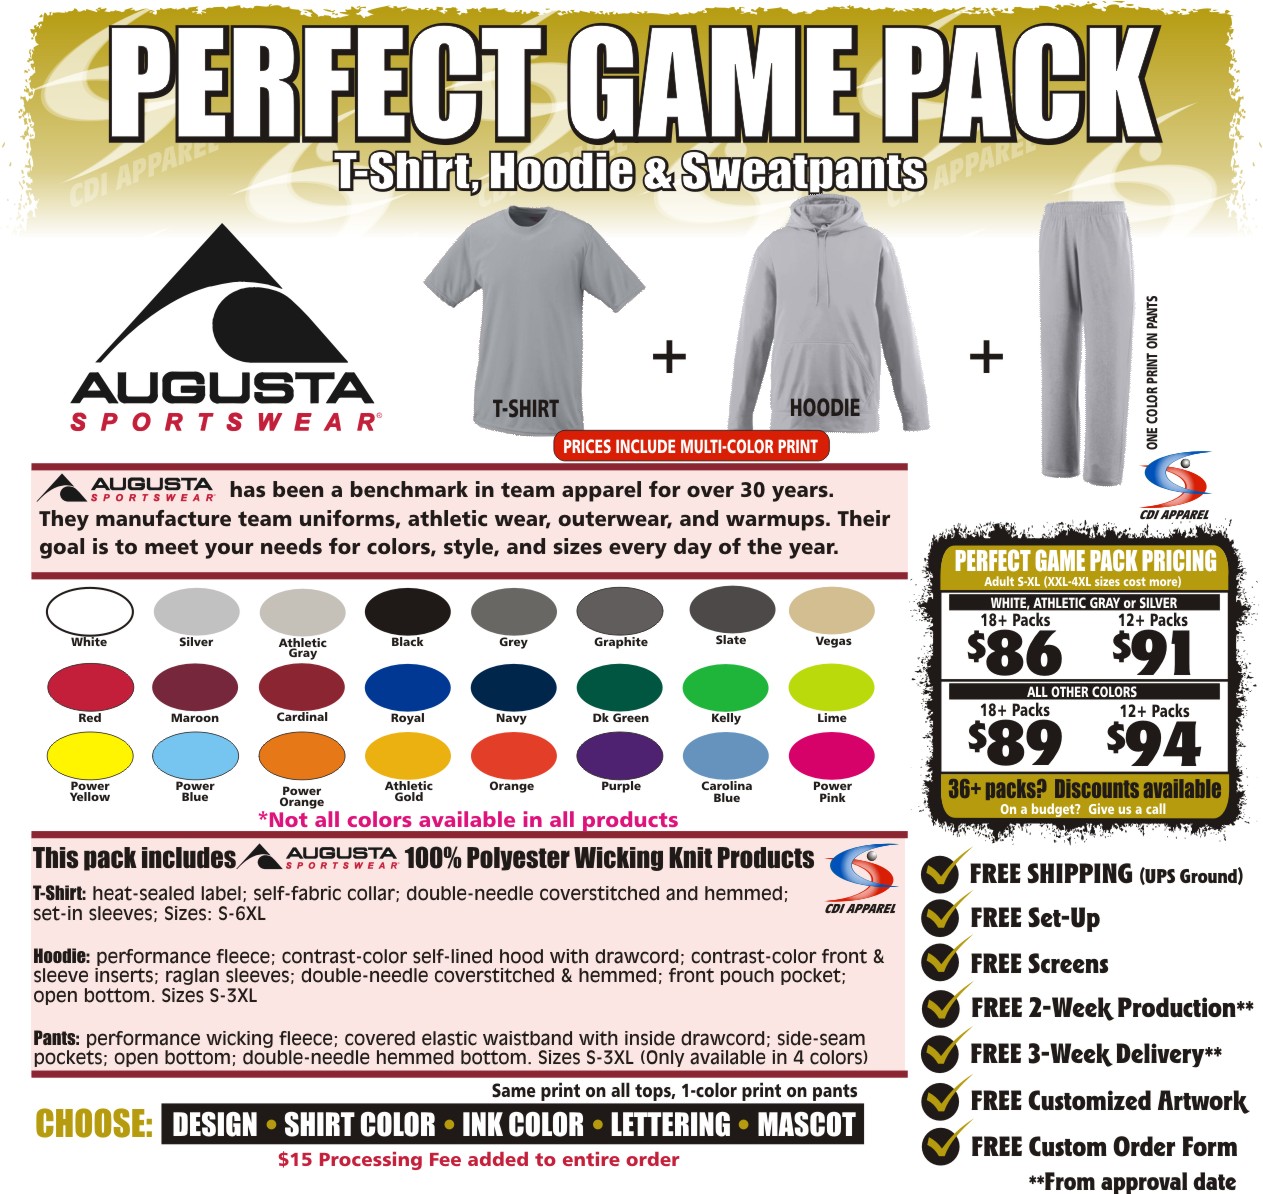 Warm-Up Pack (Perfect Game Pack) Baseball 2017 Augusta